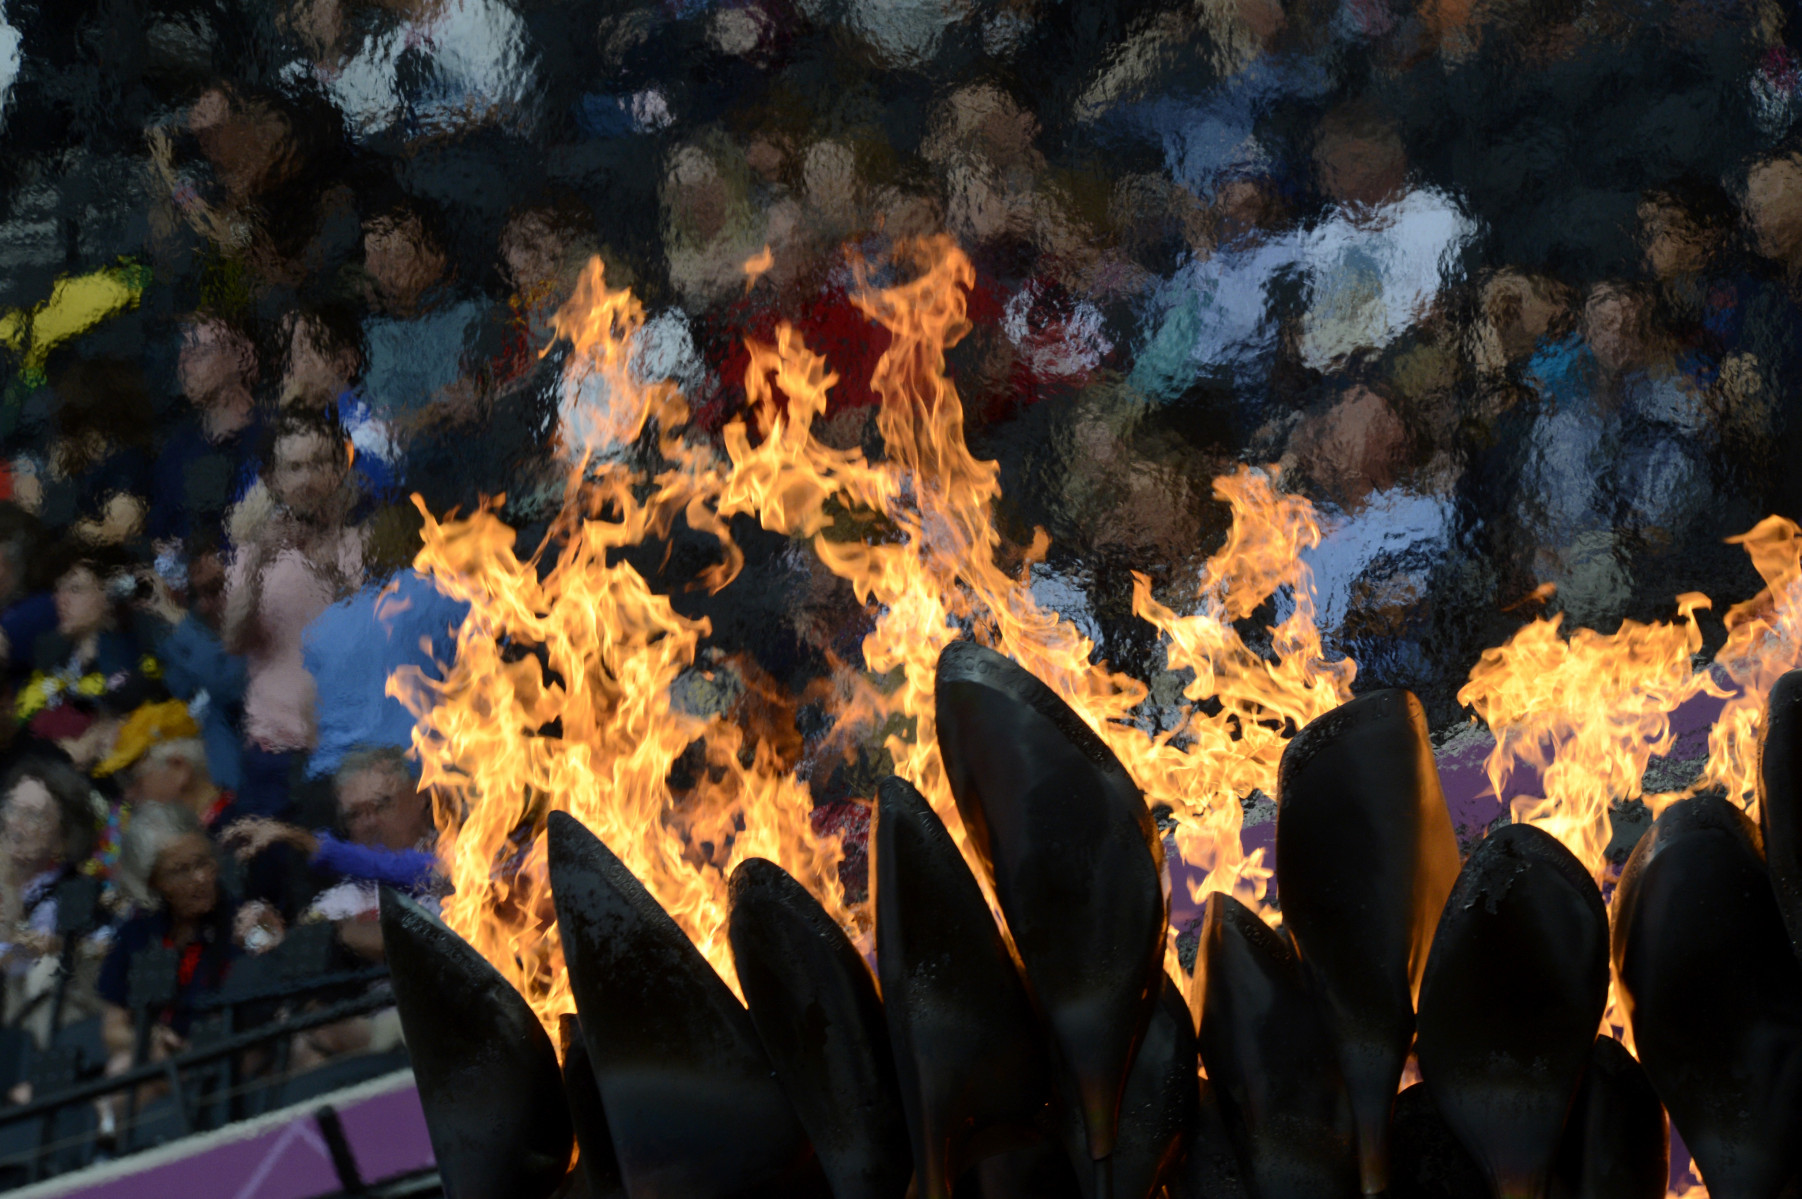 The Olympic flame with spectators at the Olympic Stadium in the background.  : London Olympics : Photography by Adam Stoltman: Sports Photography, The Arts, Portraiture, Travel, Photojournalism and Fine Art in New York